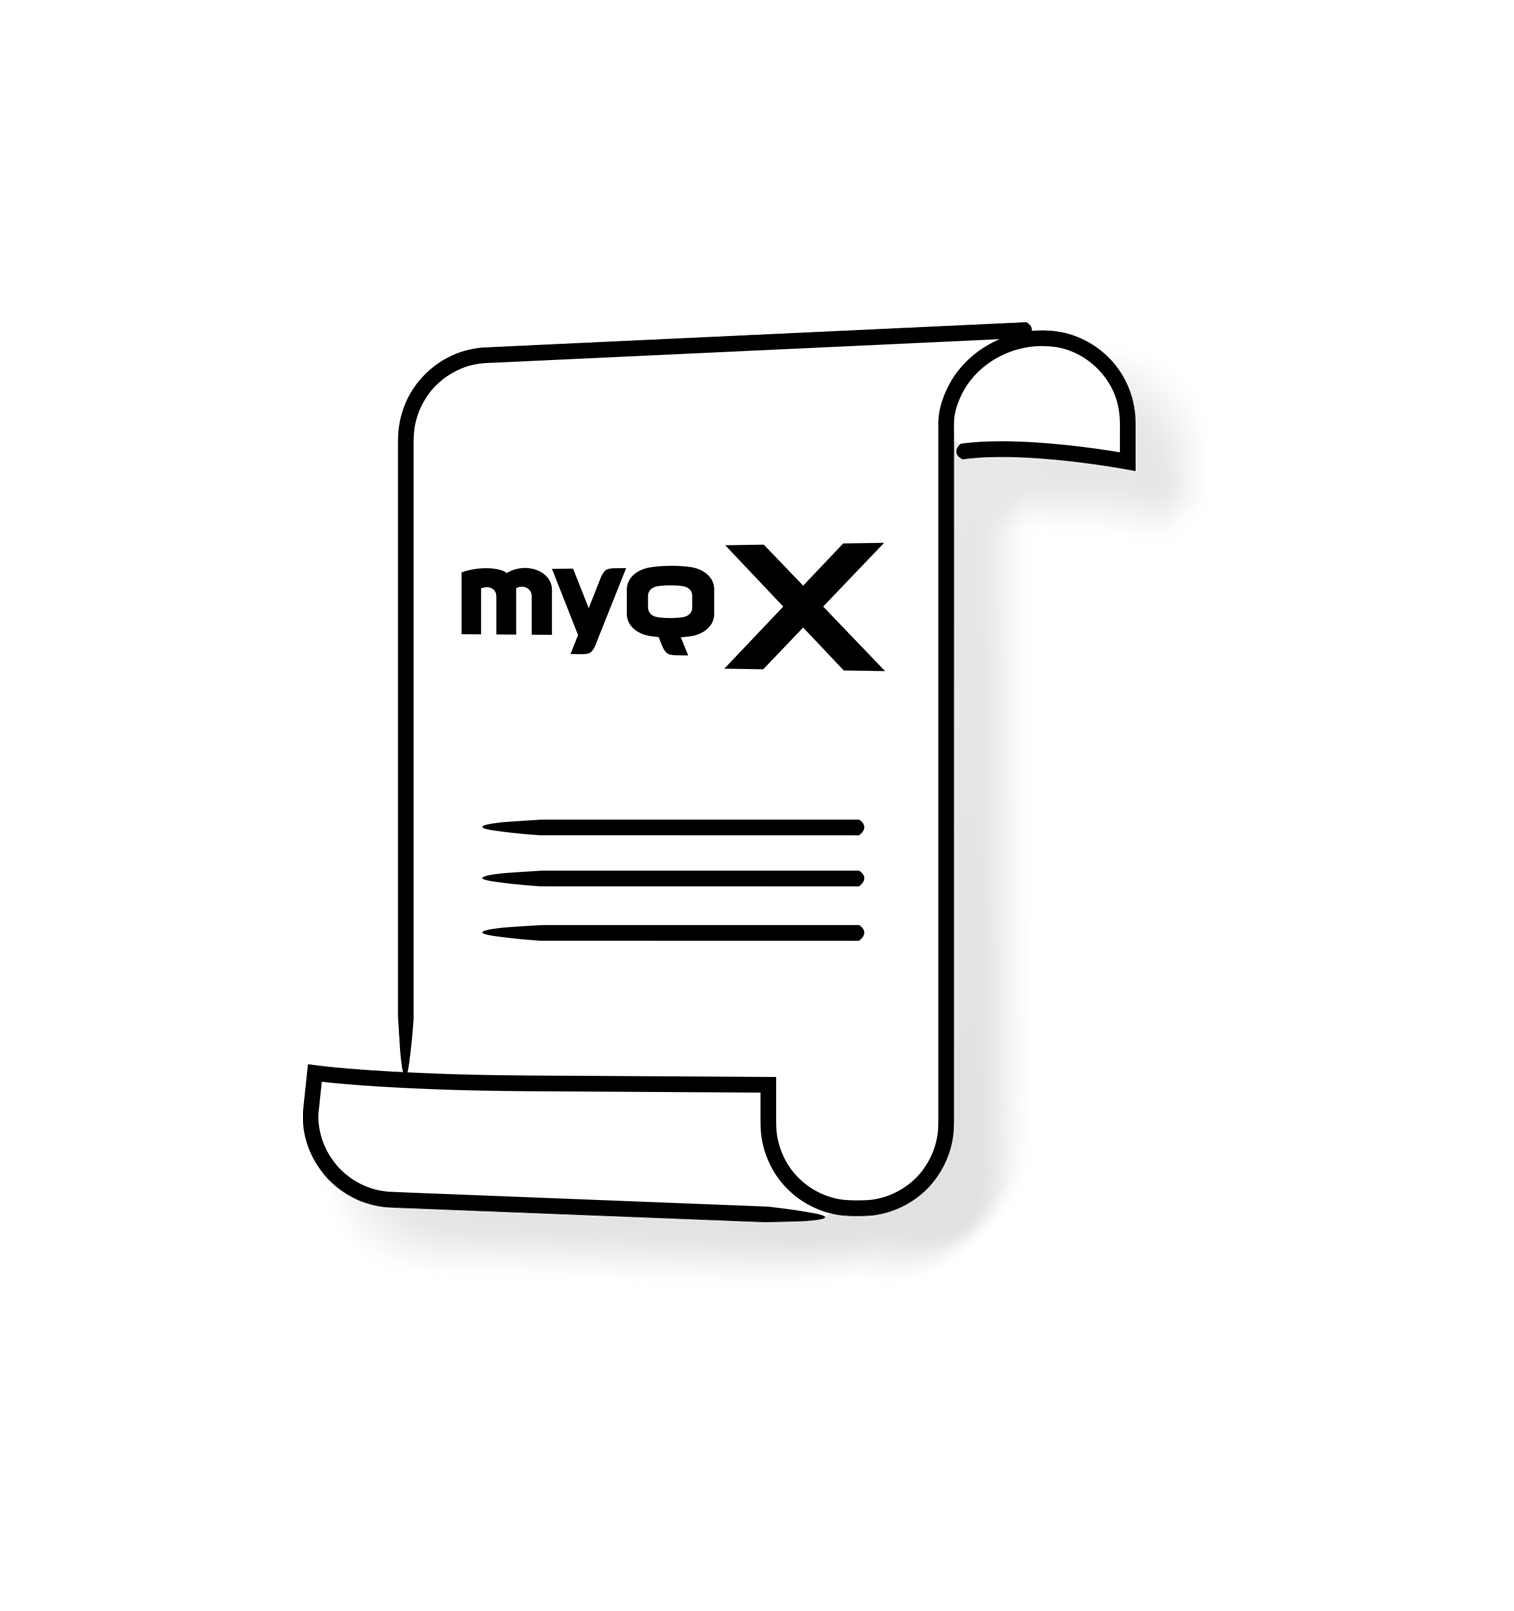 Documents related to MyQ X